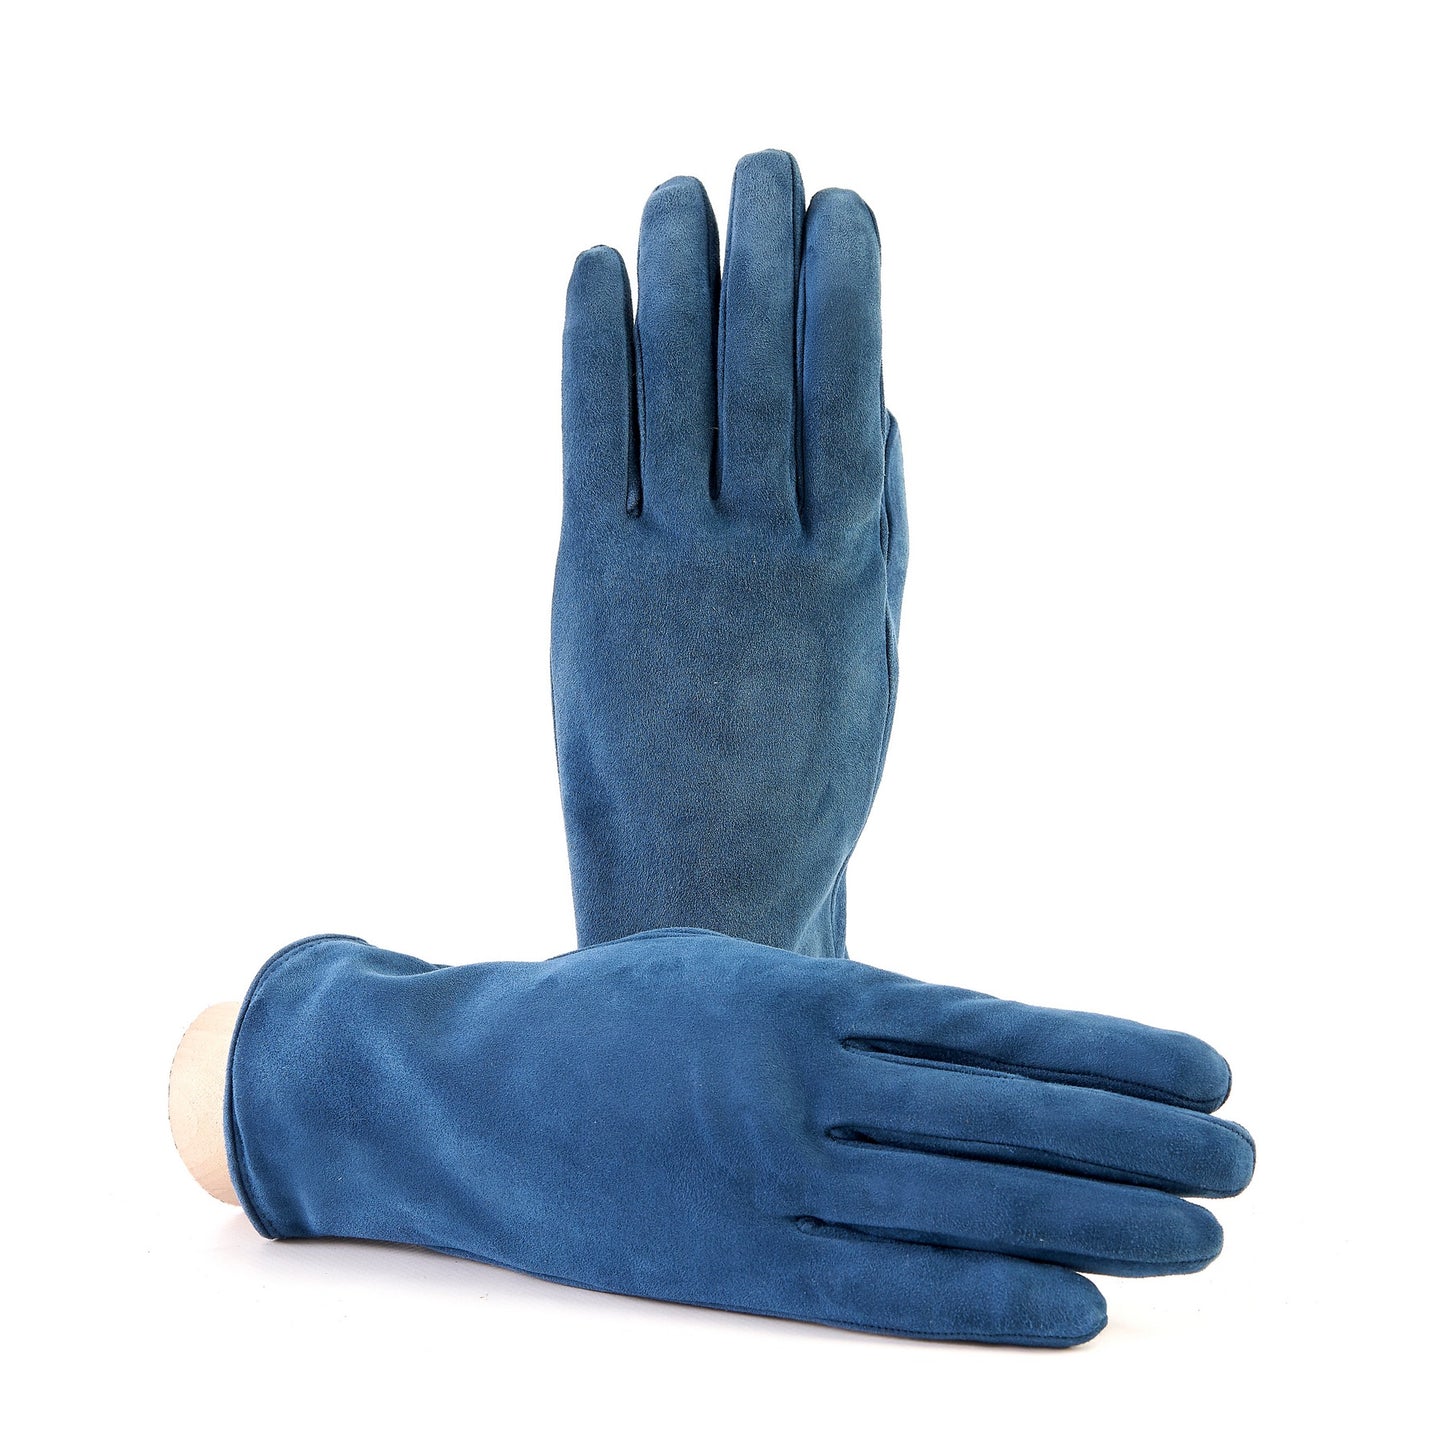 Women’s basic petrol soft suede leather gloves with palm opening and mix cashmere lining